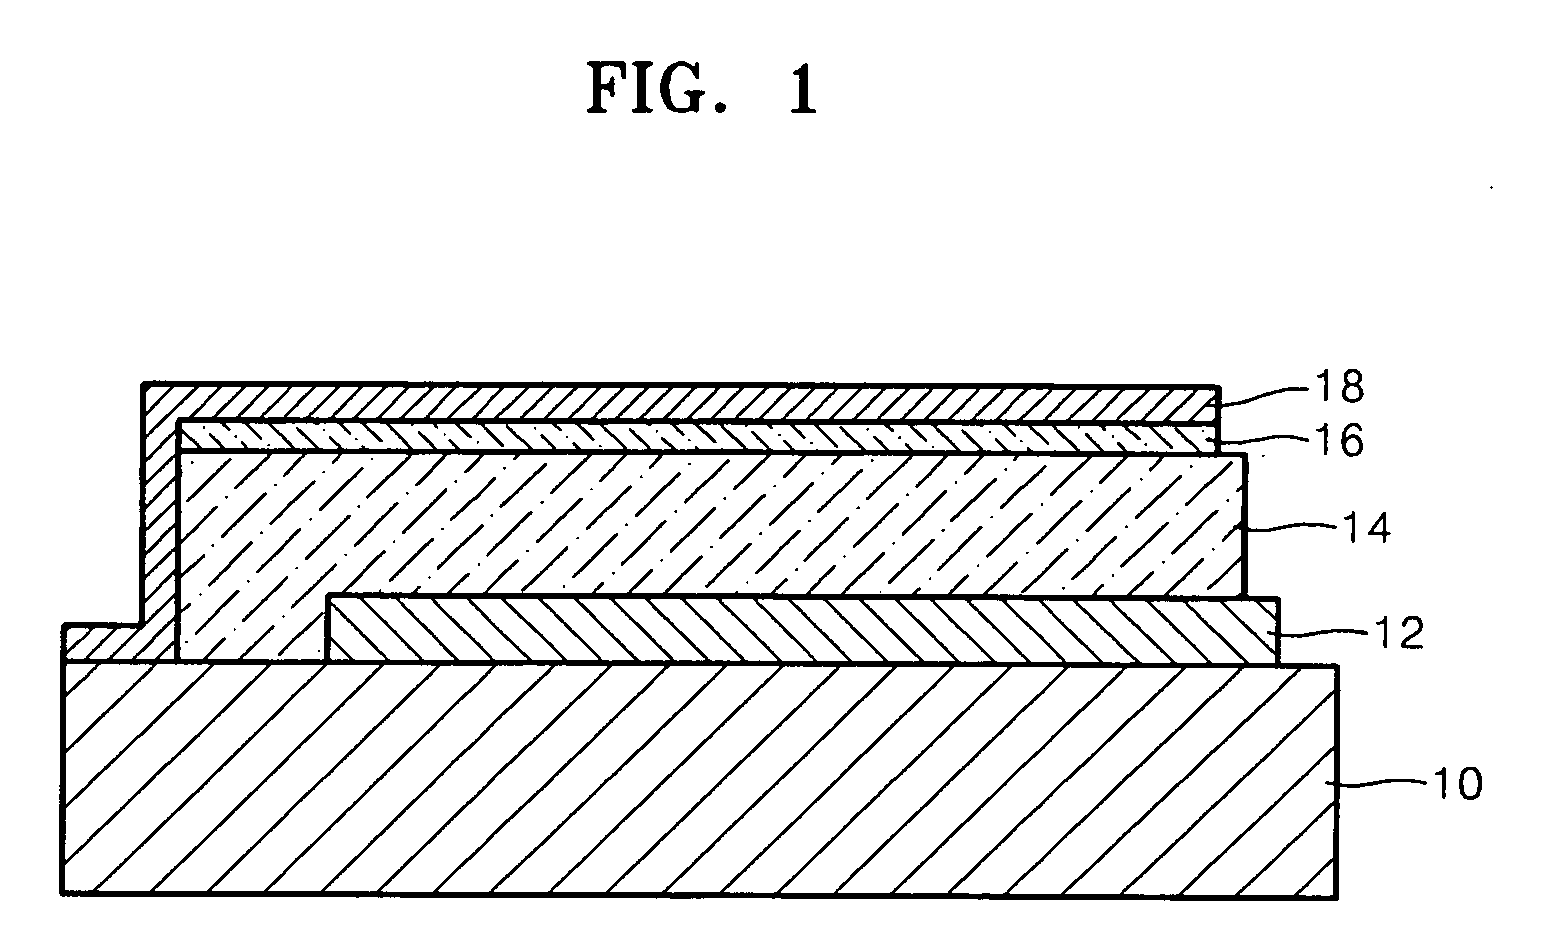 Electron injecting layer including superacid salt, lithium salt or mixture thereof, photovoltaic device including the electron injecting layer, method of manufacturing the photovoltaic device, and organic light-emitting device including the electron injecting layer